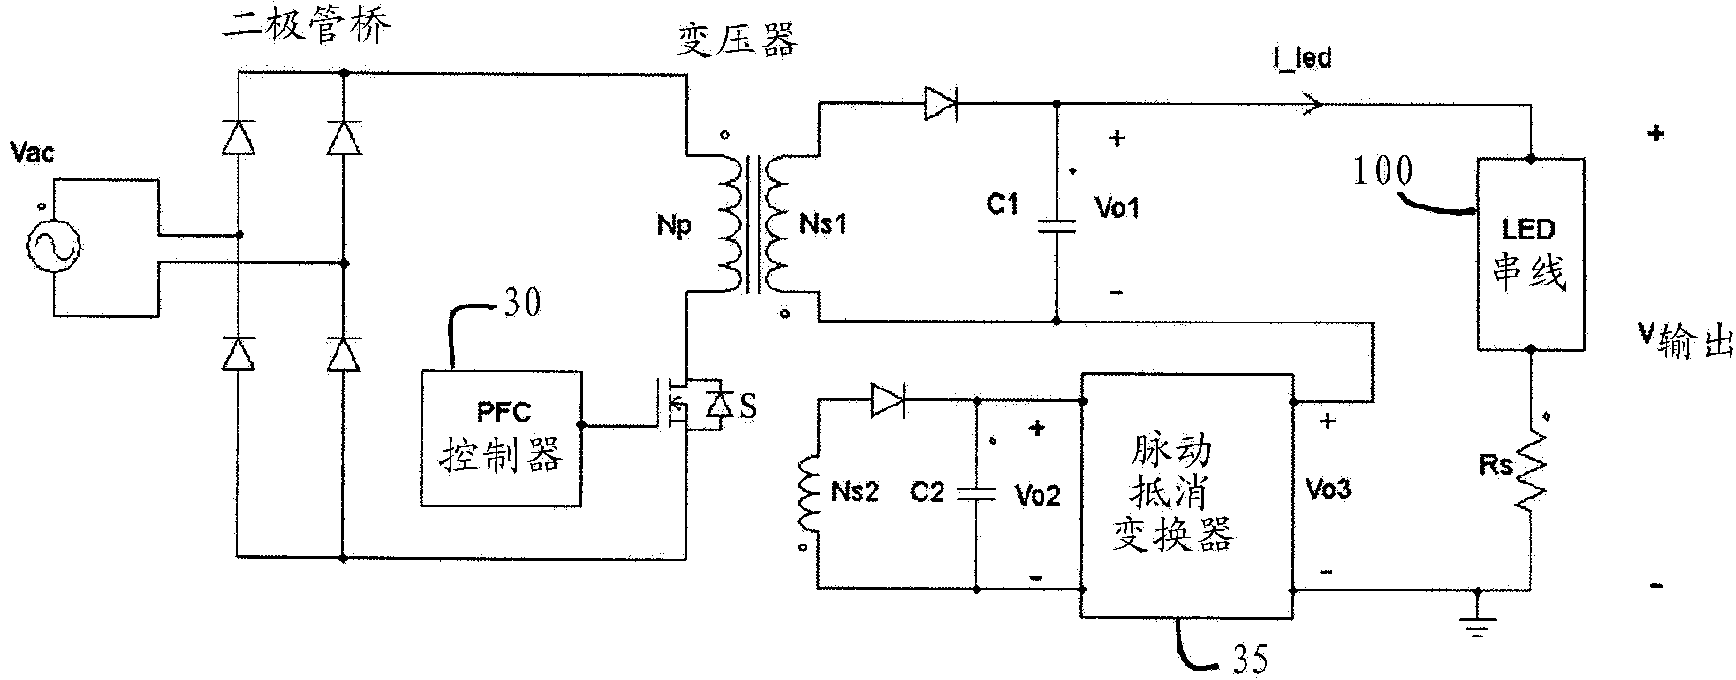 Ripple cancellation converter with high power factor